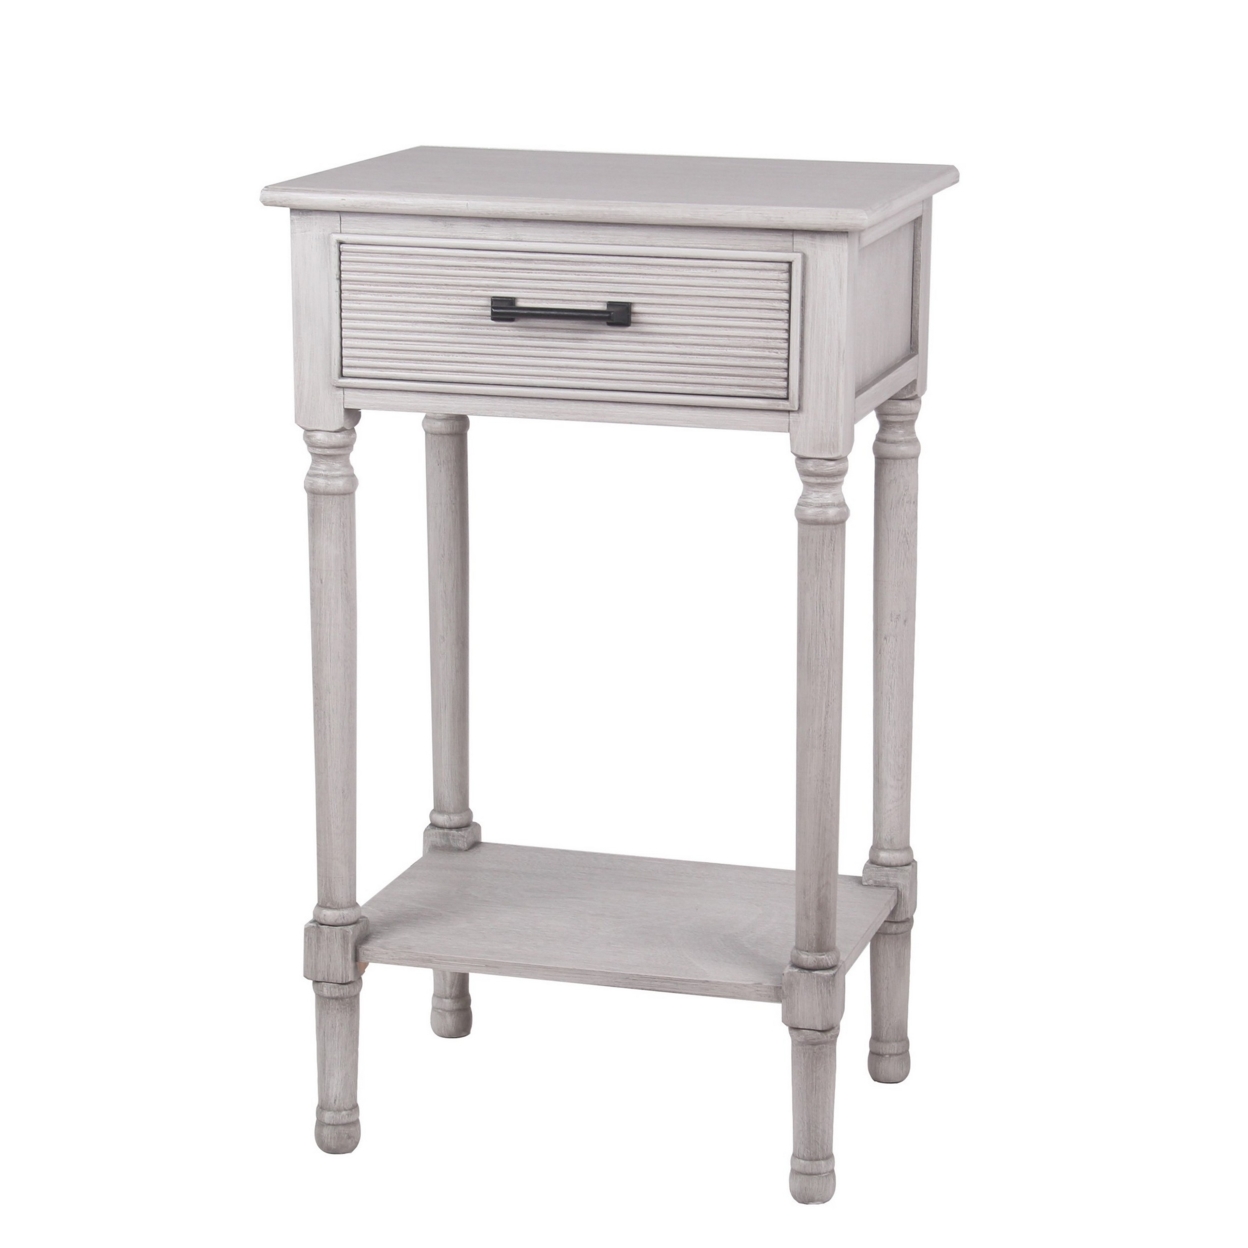 30 Inch Classic Accent End Table With Drawer And Shelf, Metal Handle, White- Saltoro Sherpi